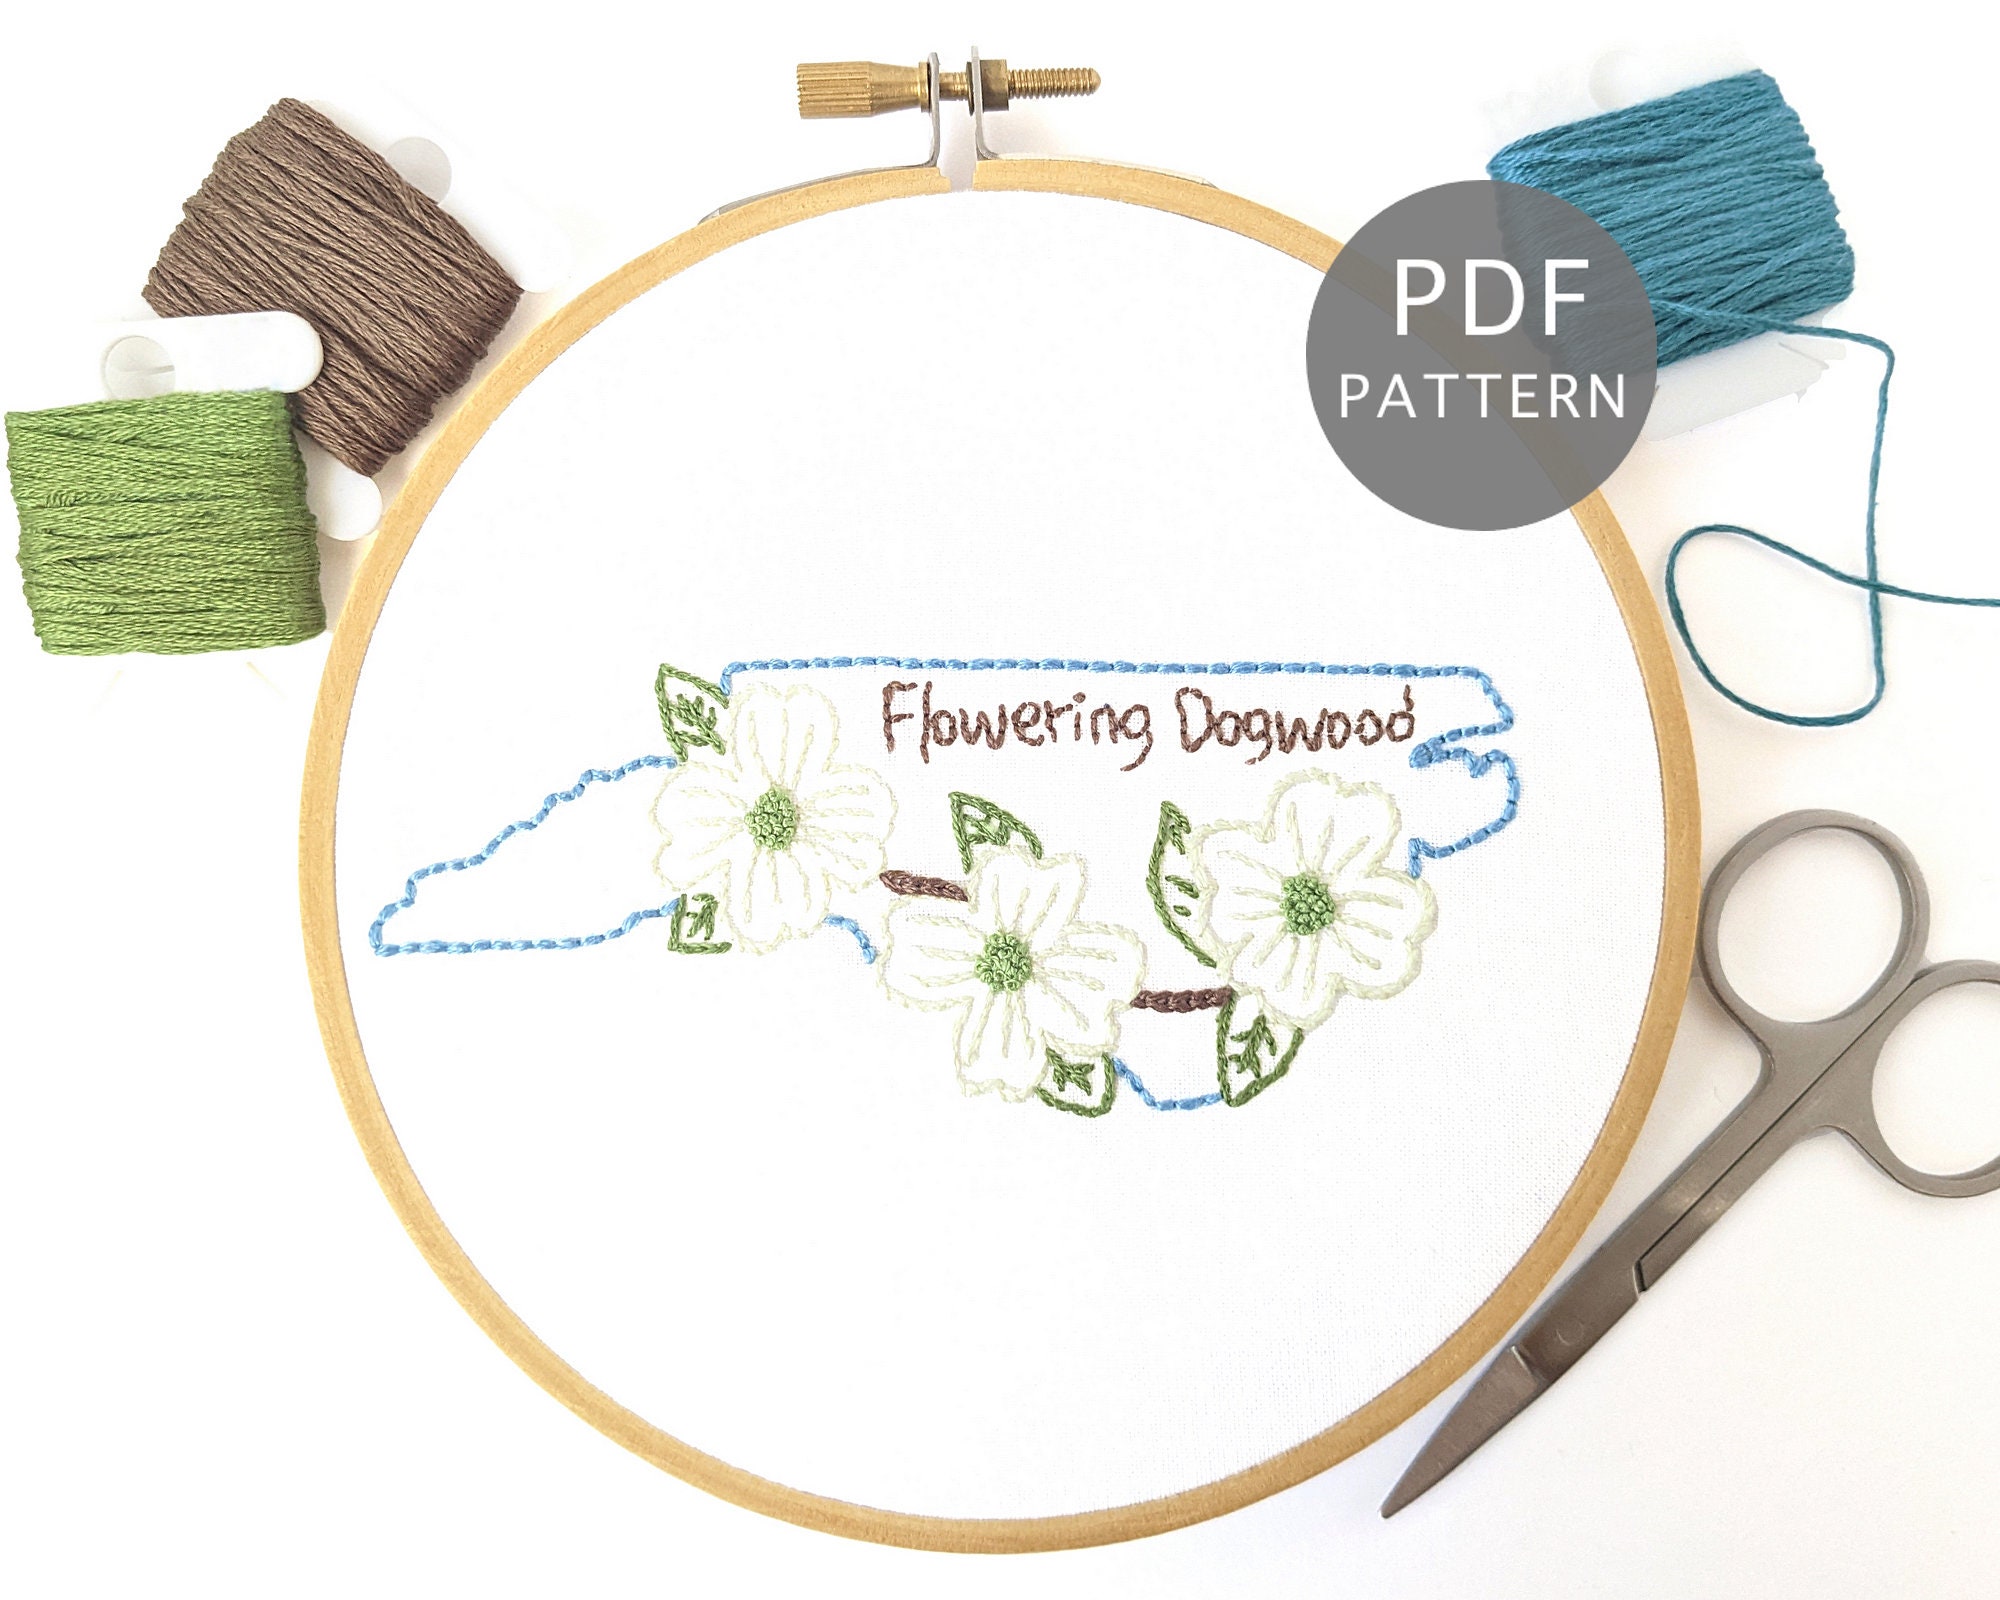 How to Transfer Embroidery: 3 Simple Methods - Wandering Threads